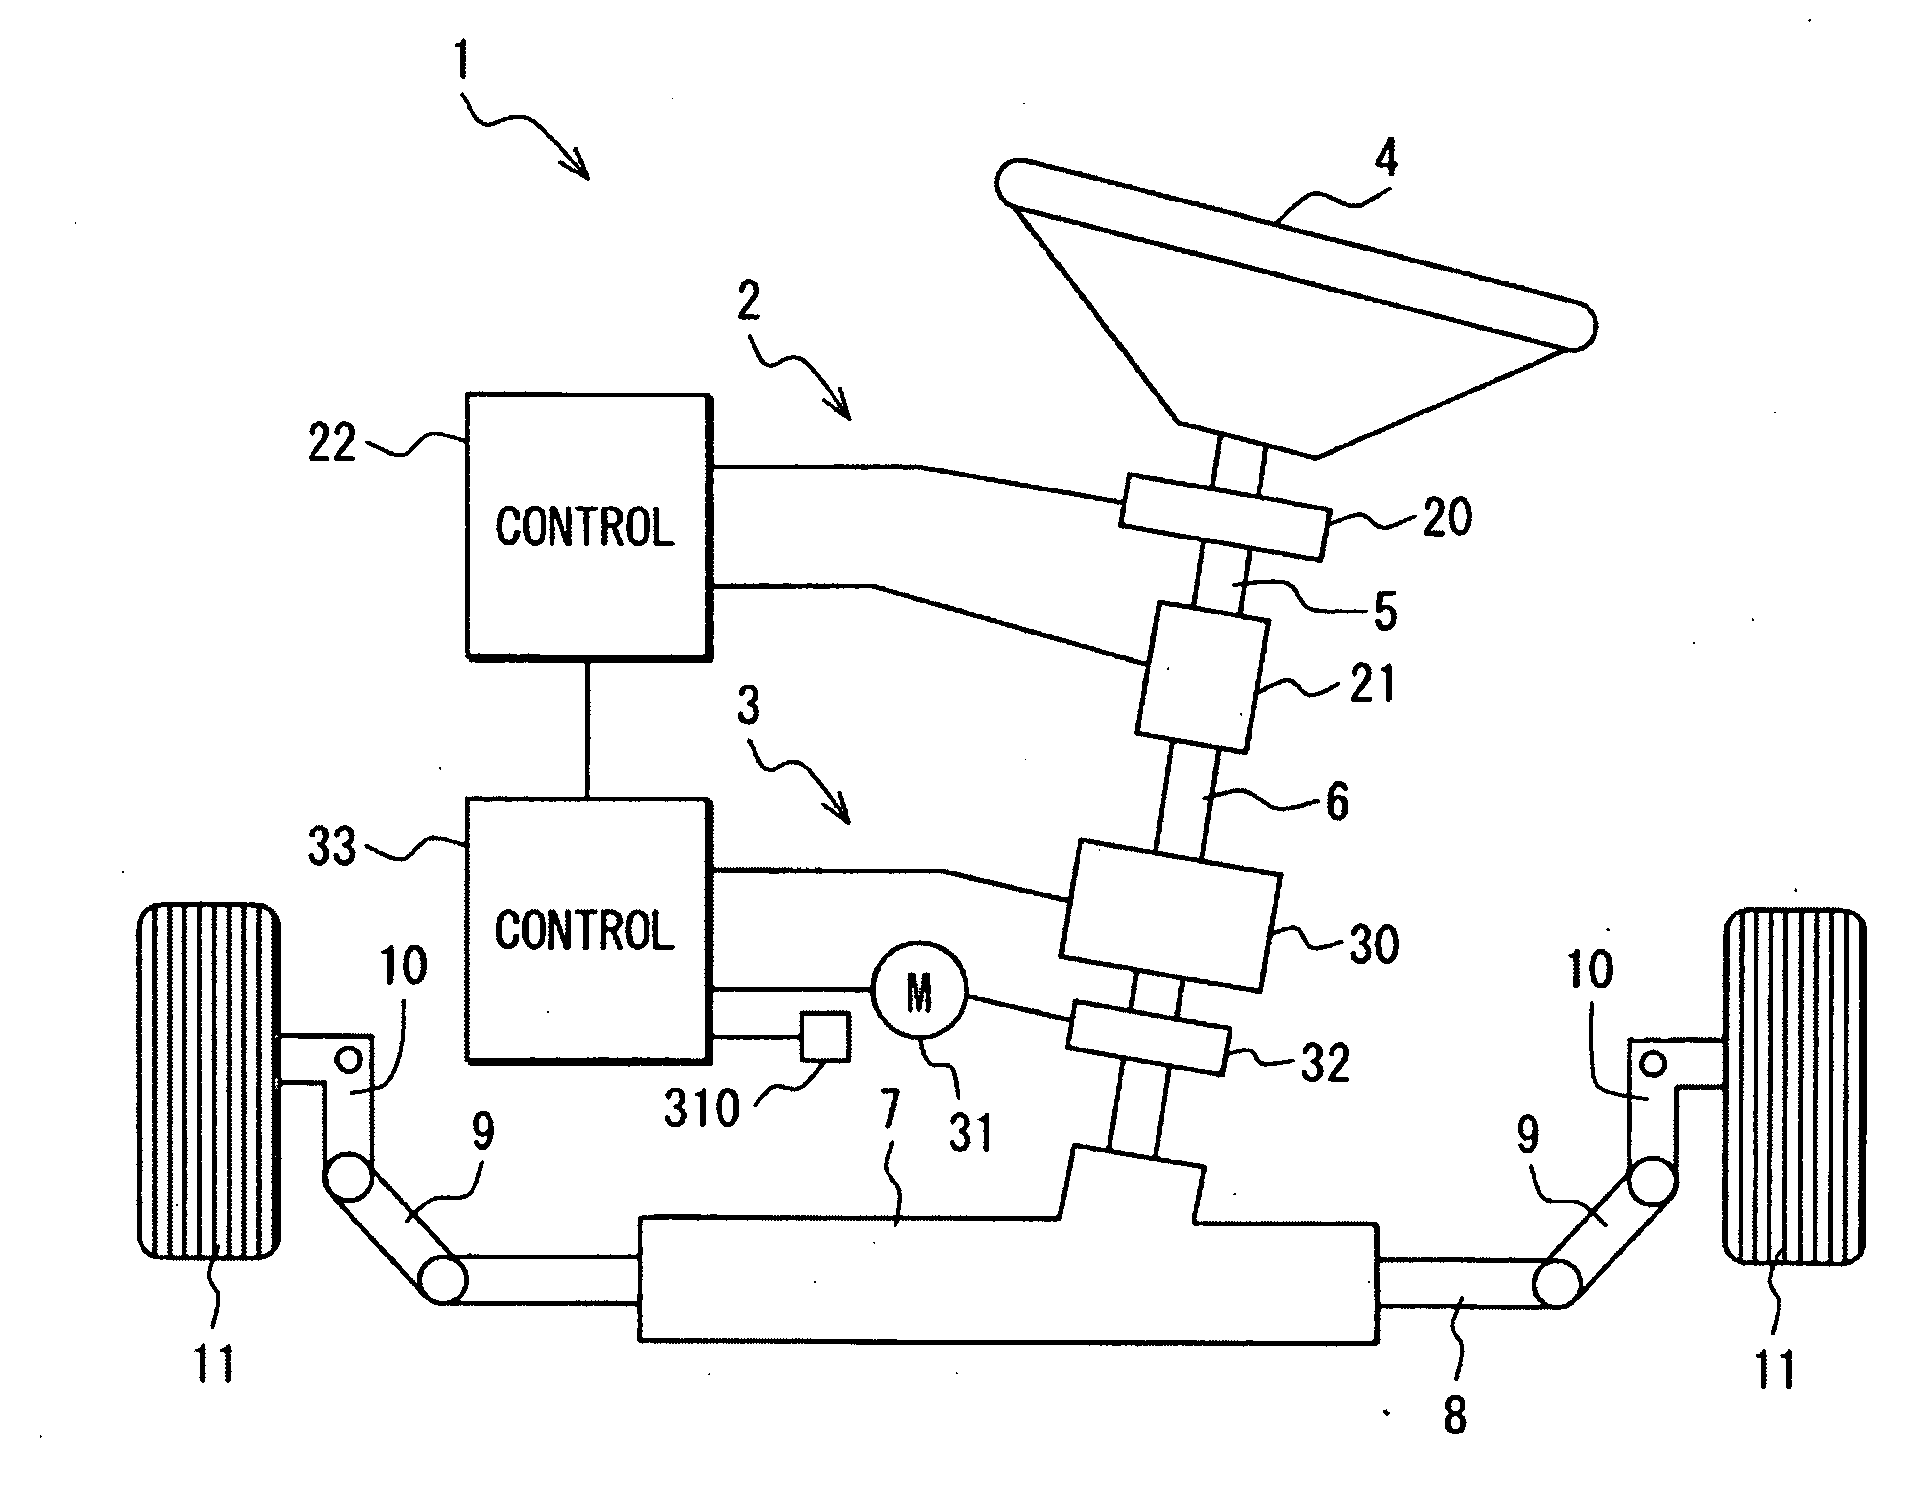 Steering assisting system for vehicle